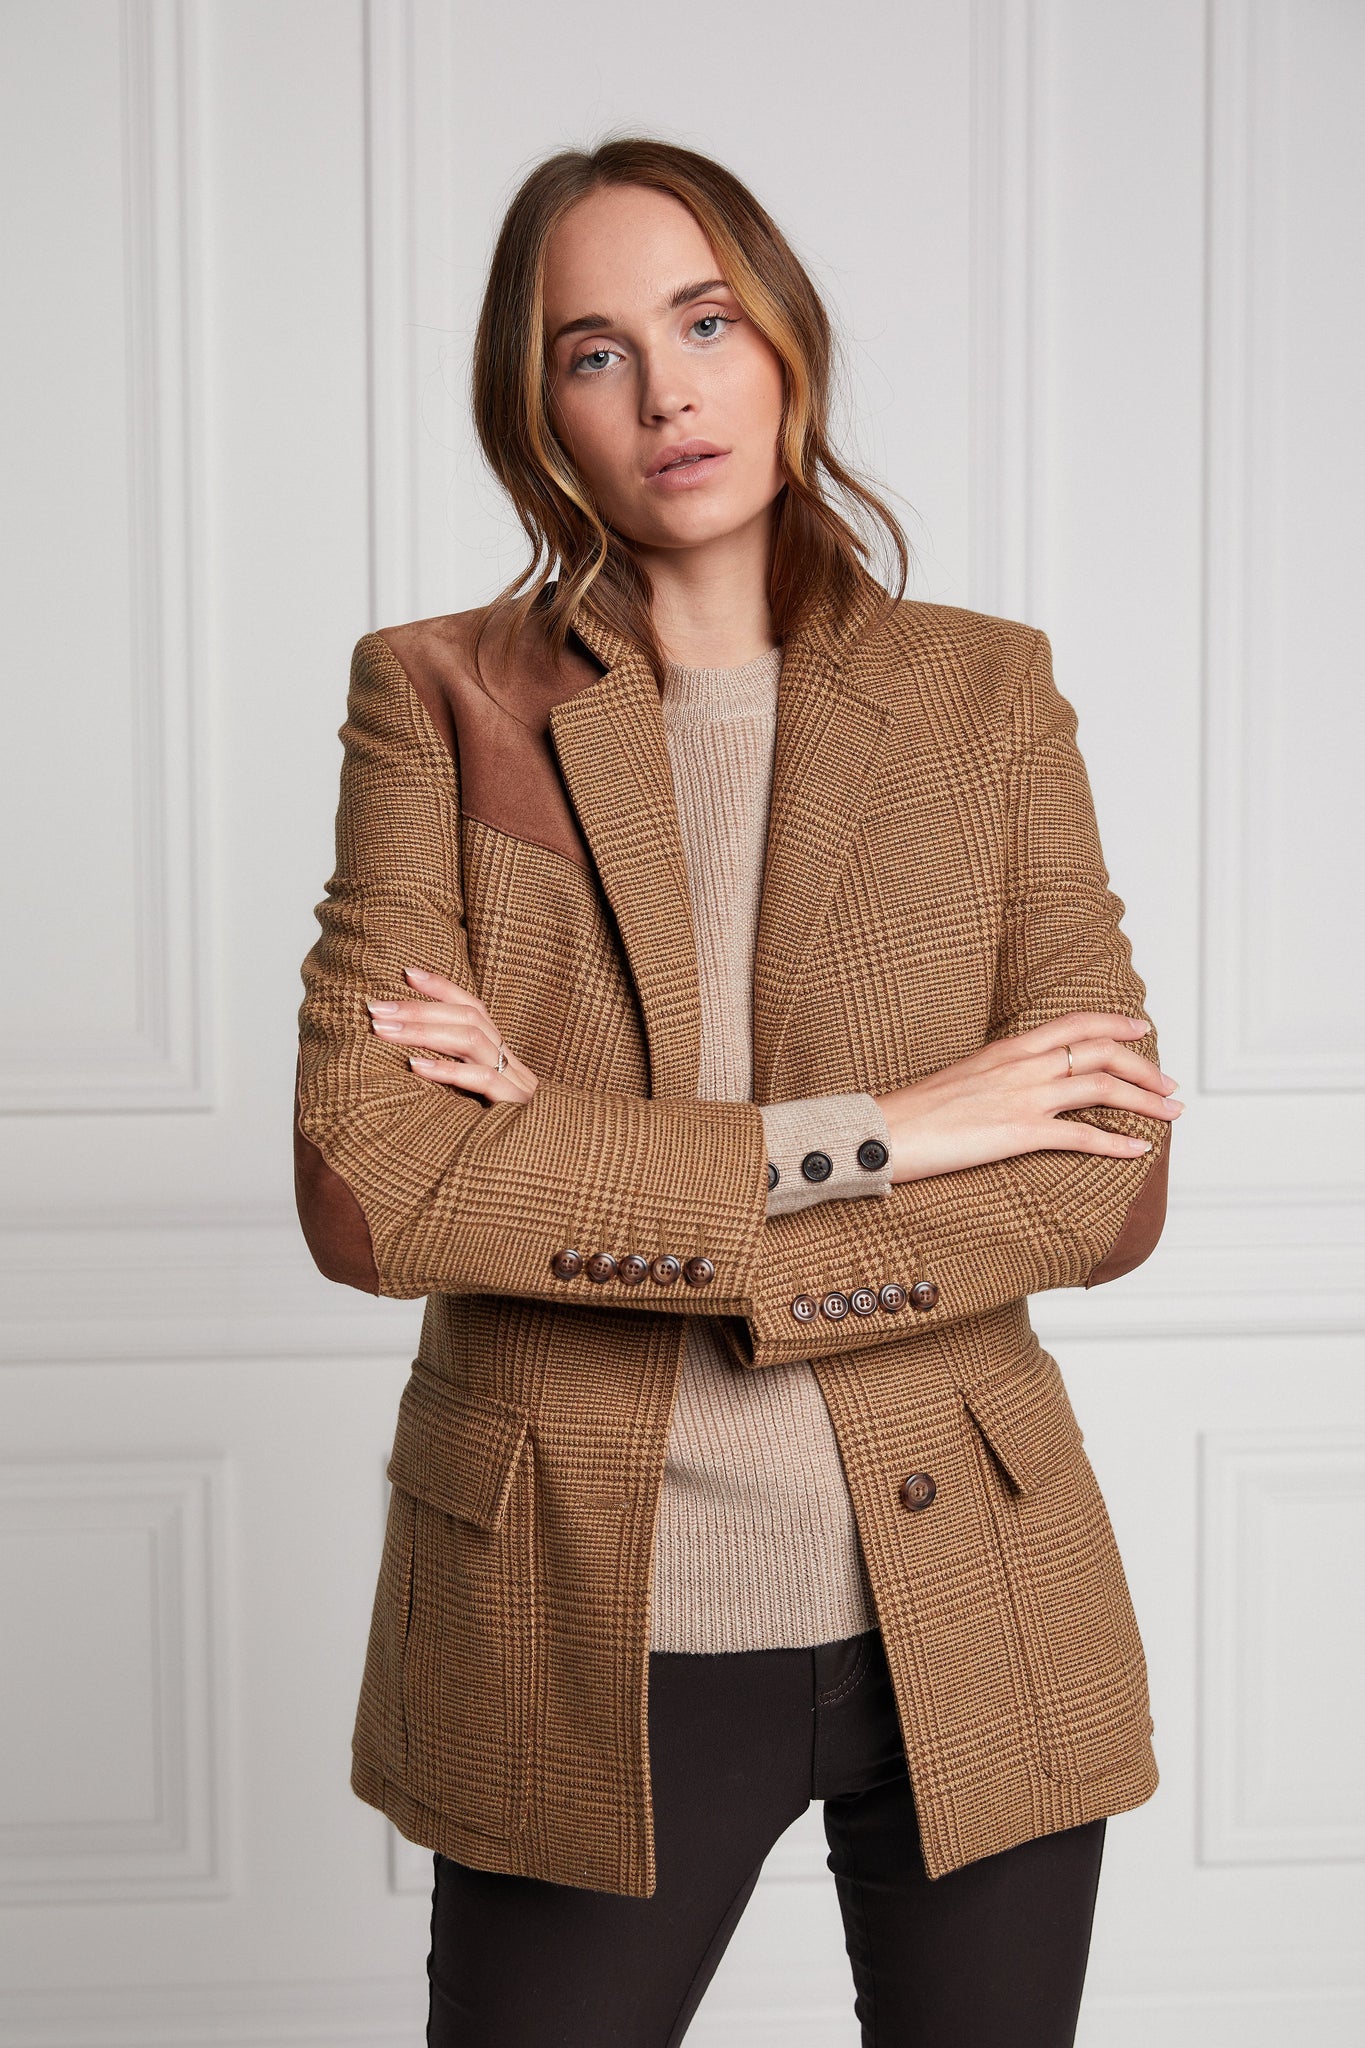 womens classic slim fit single breasted blazer in tawny and brown check with lower patch pockets with concealed button flap contrast tan suede shoulder gun patch with elbow patches and horn button finish on cuffs and front